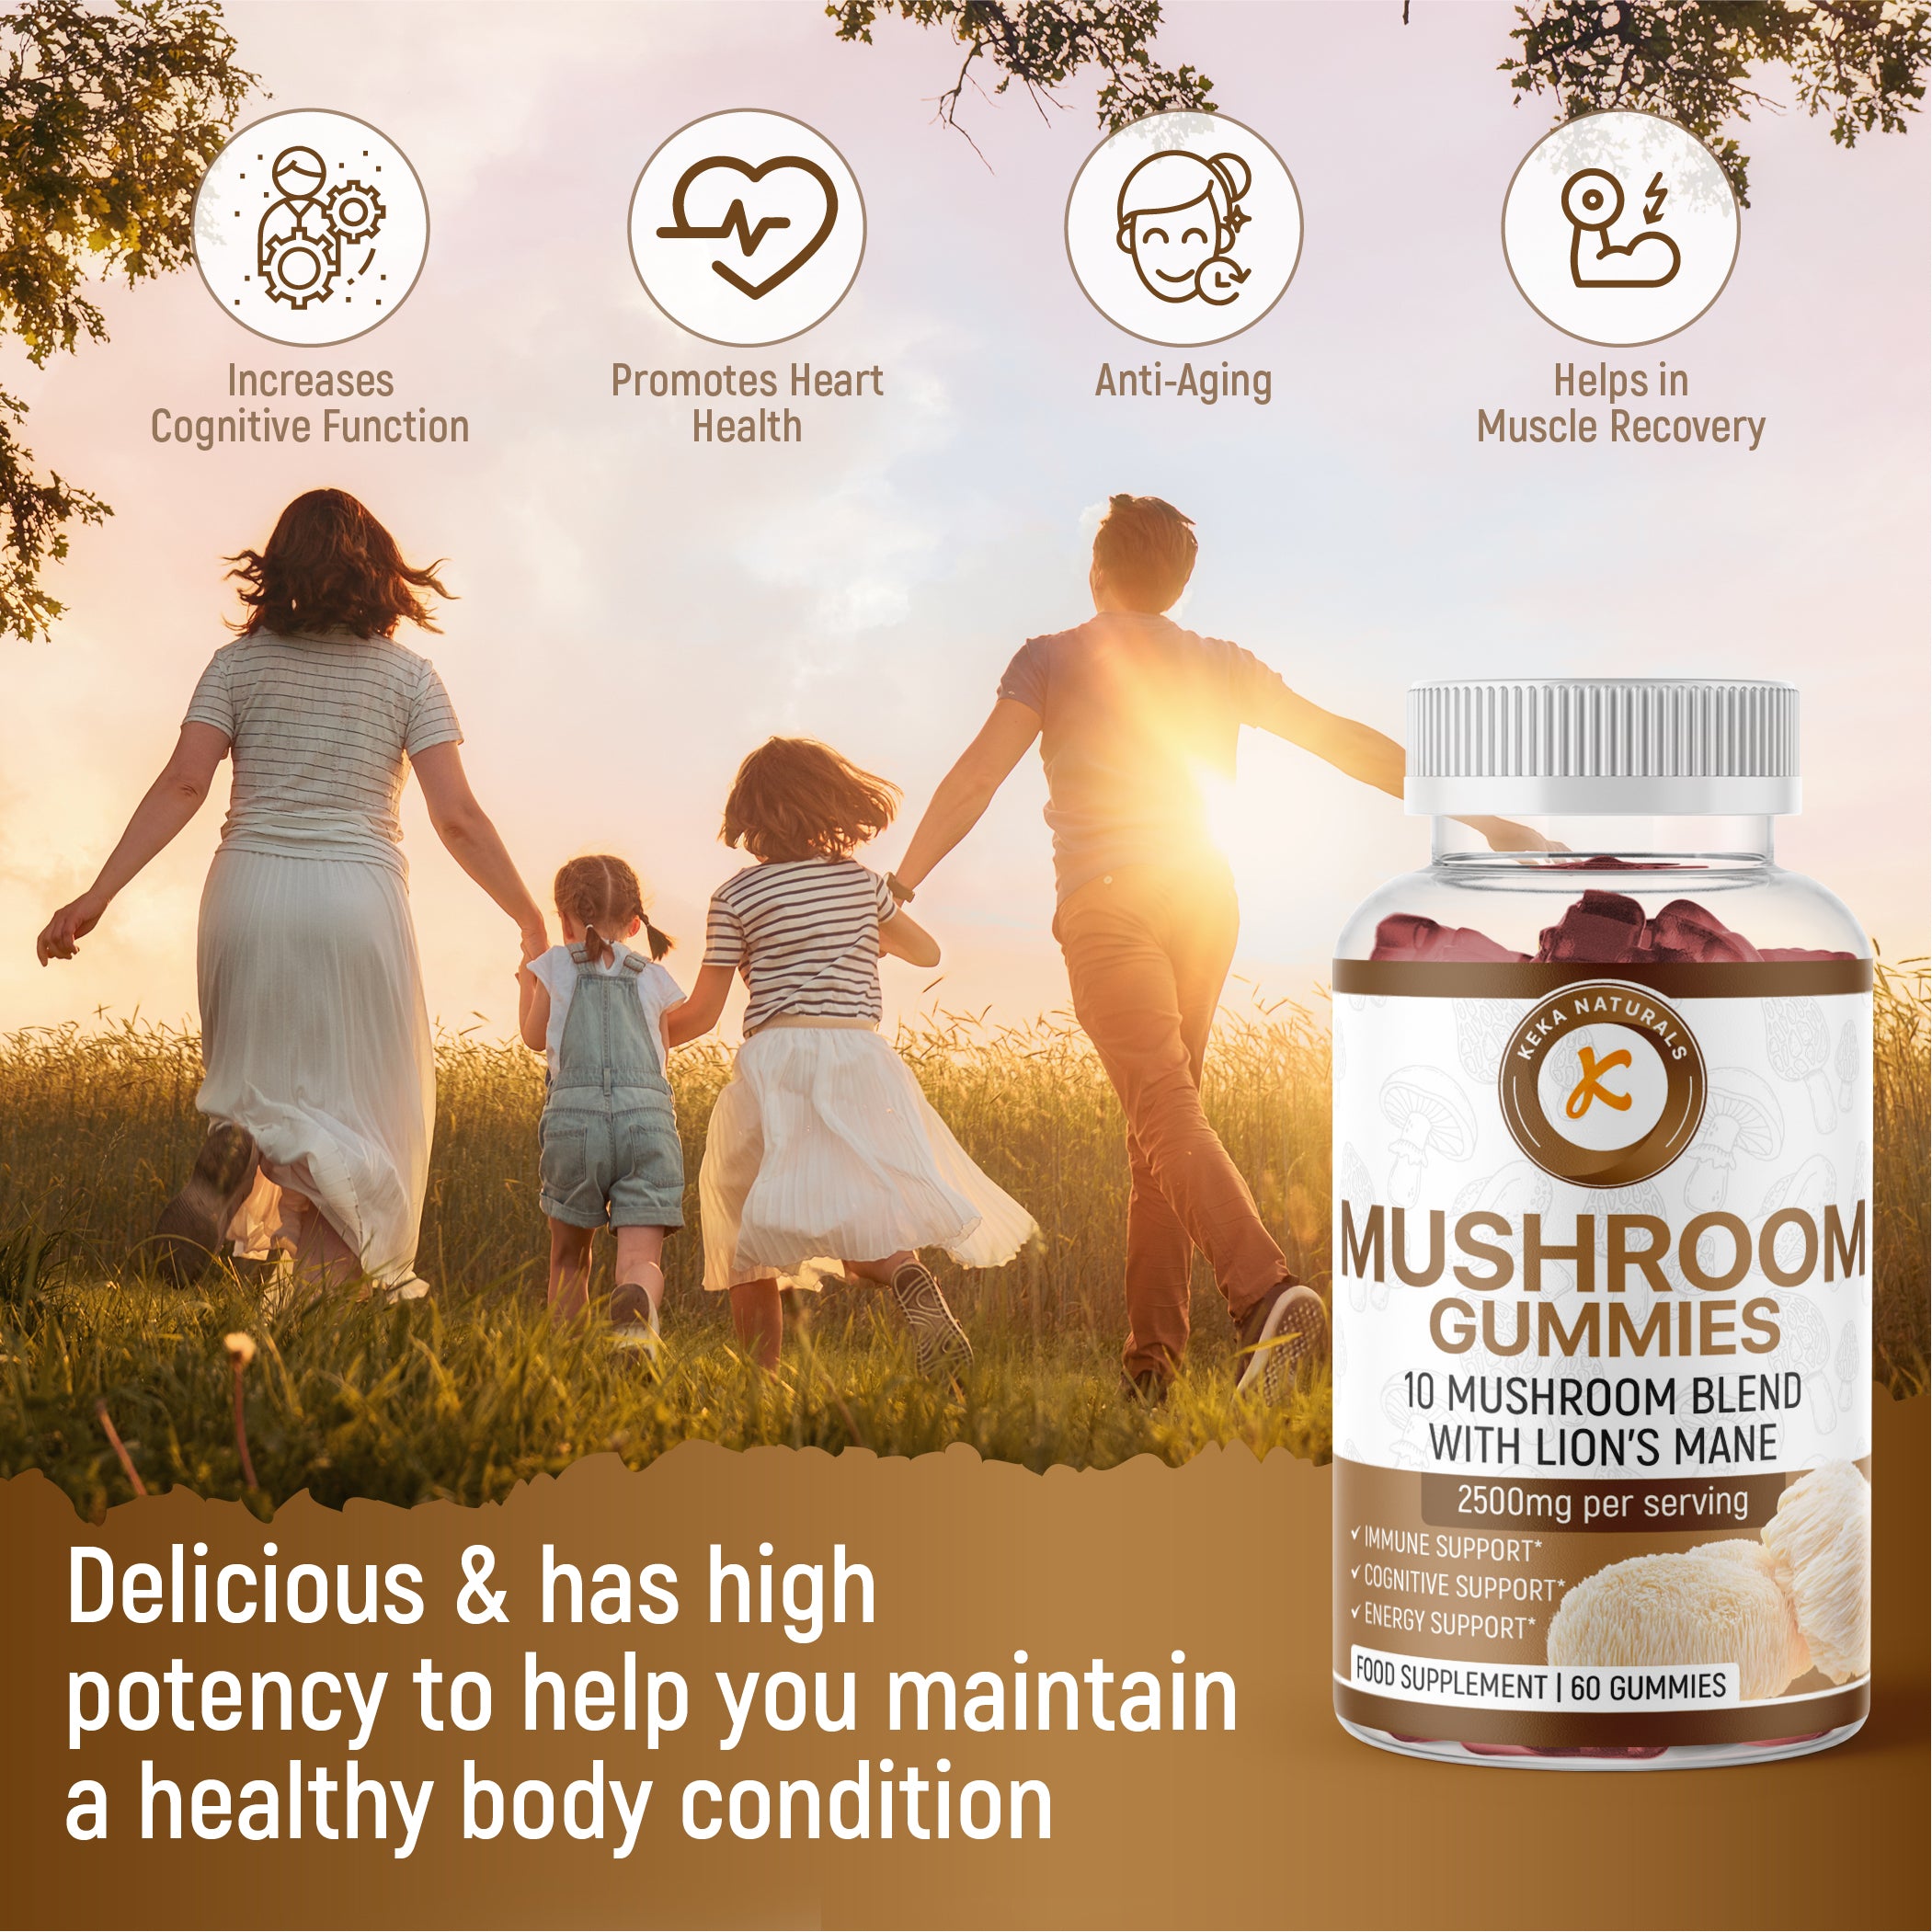 Mushroom Gummies 2500mg 10 mushroom blend with lions mane to increase cognitive function promote heart health and muscle recovery